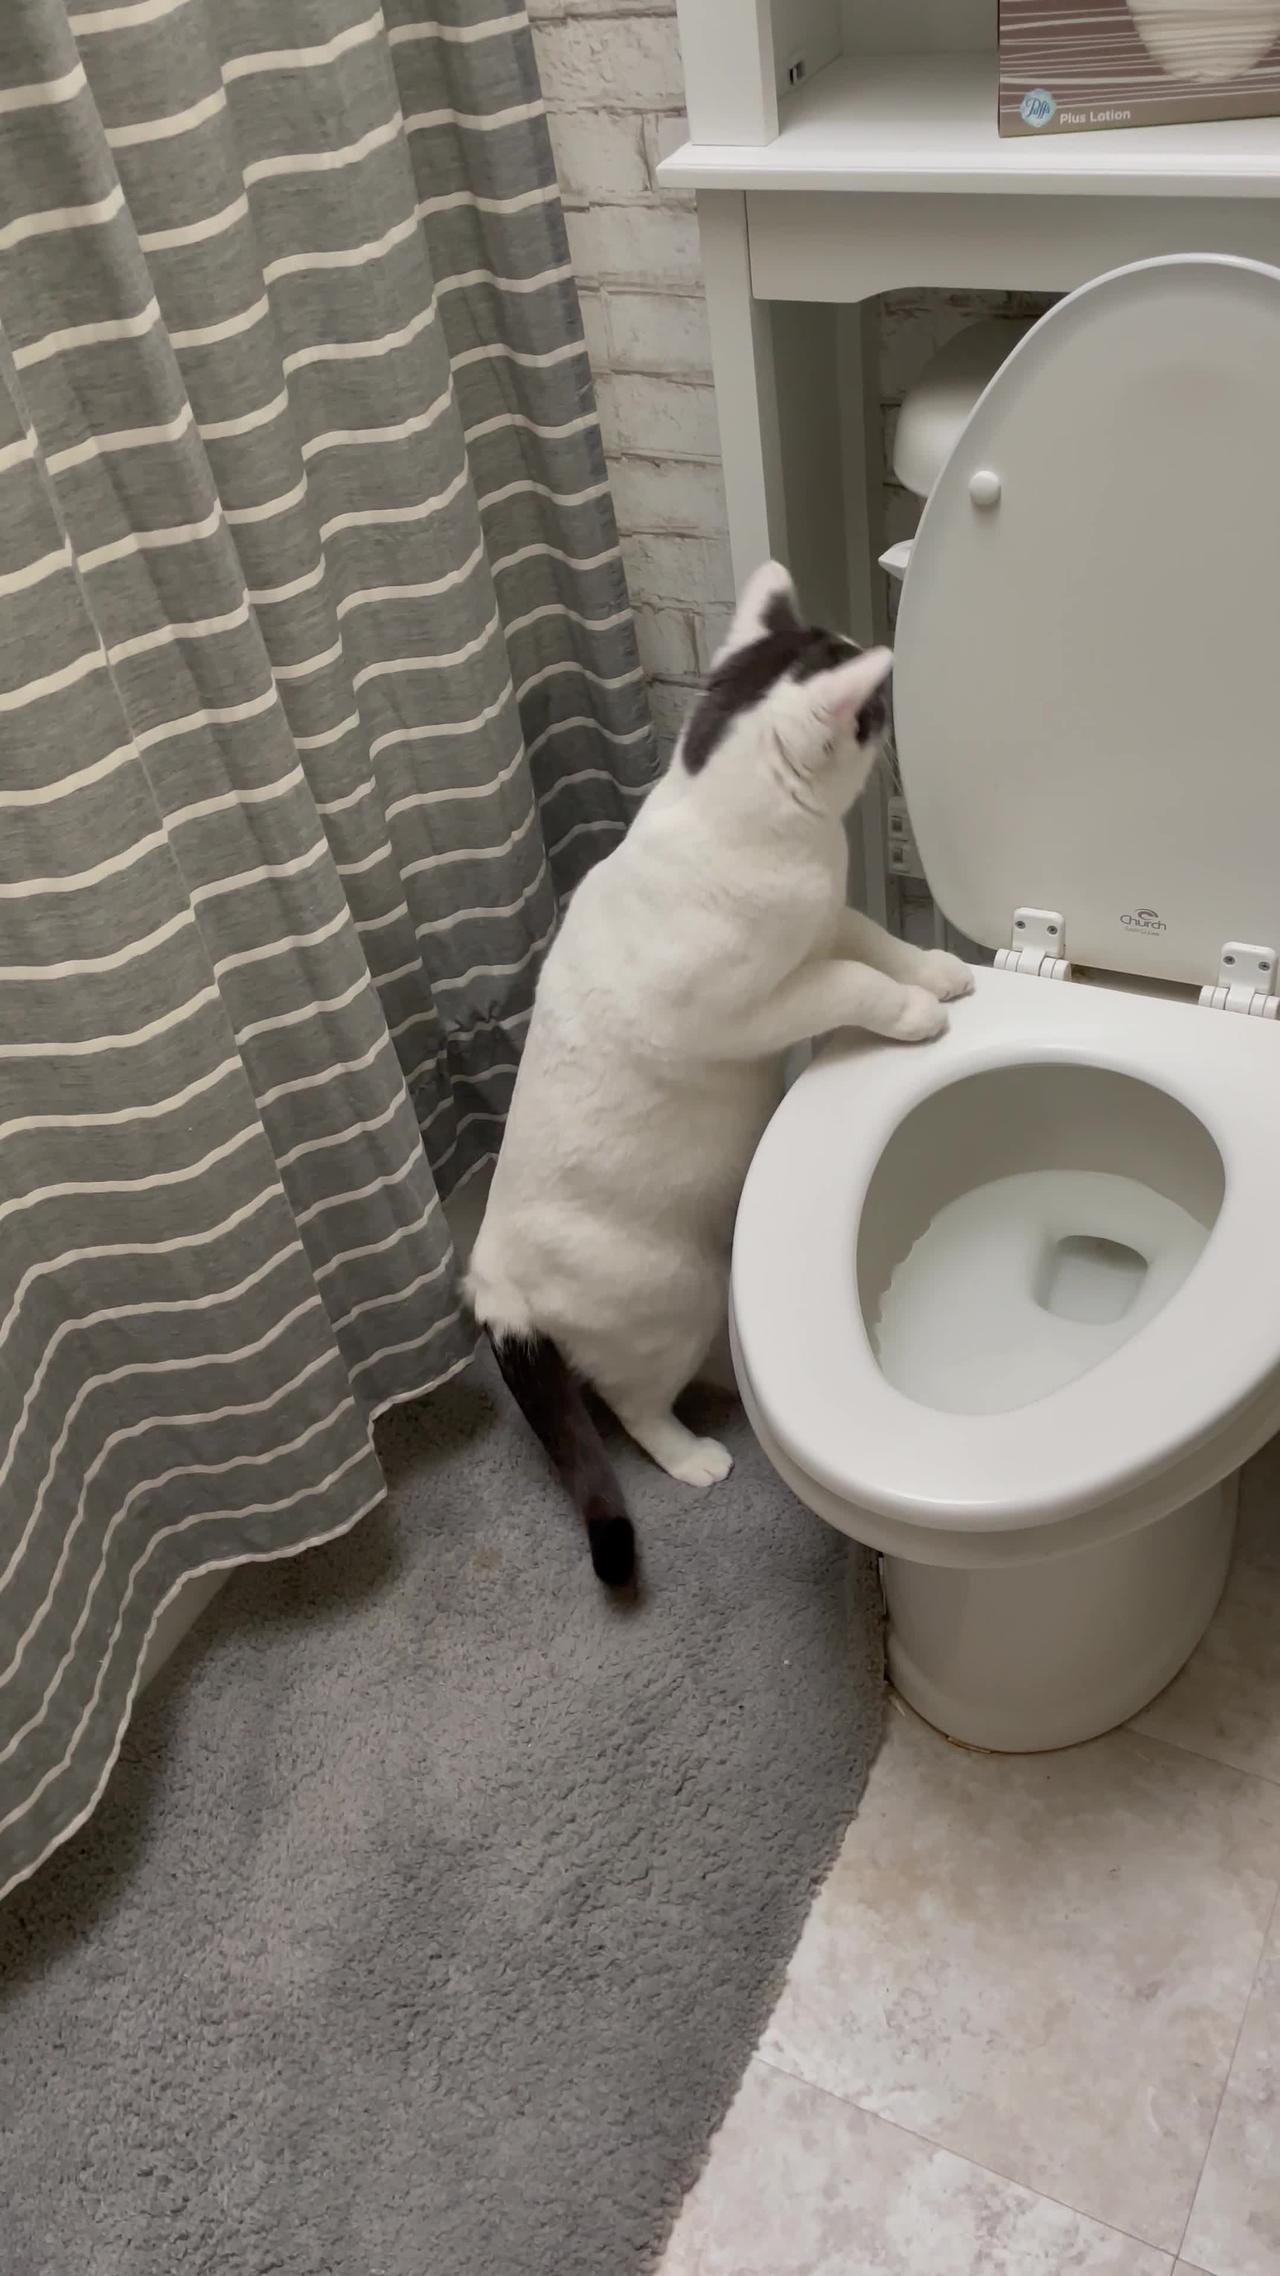 Cat Passes Time by Flushing Toilet